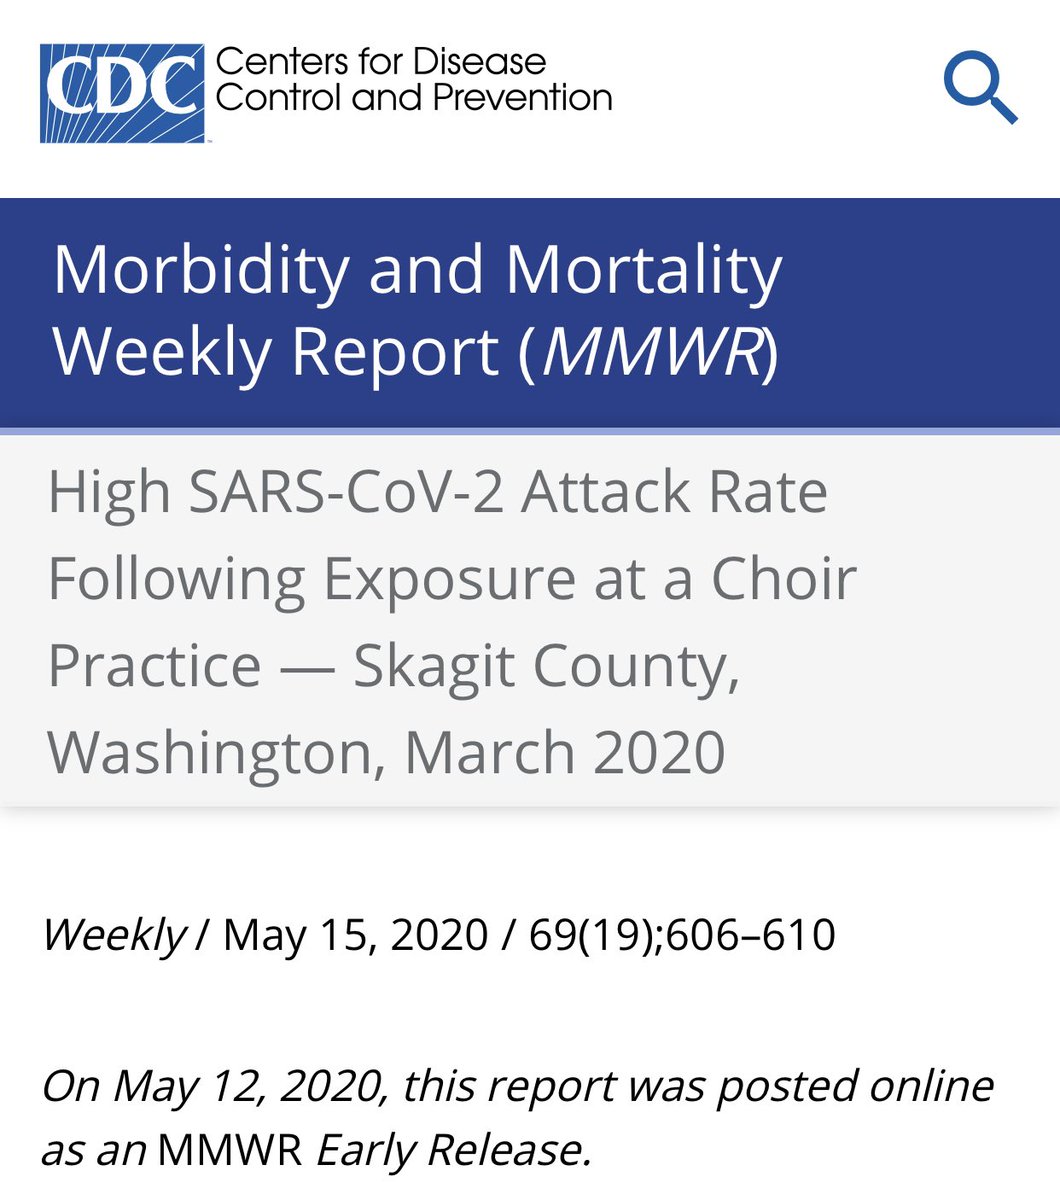 3) Here is the CDC’a  @CDCMMWR report on choir singing epidemic as proof CDC knows it’s dangerous.  https://www.cdc.gov/mmwr/volumes/69/wr/mm6919e6.htm